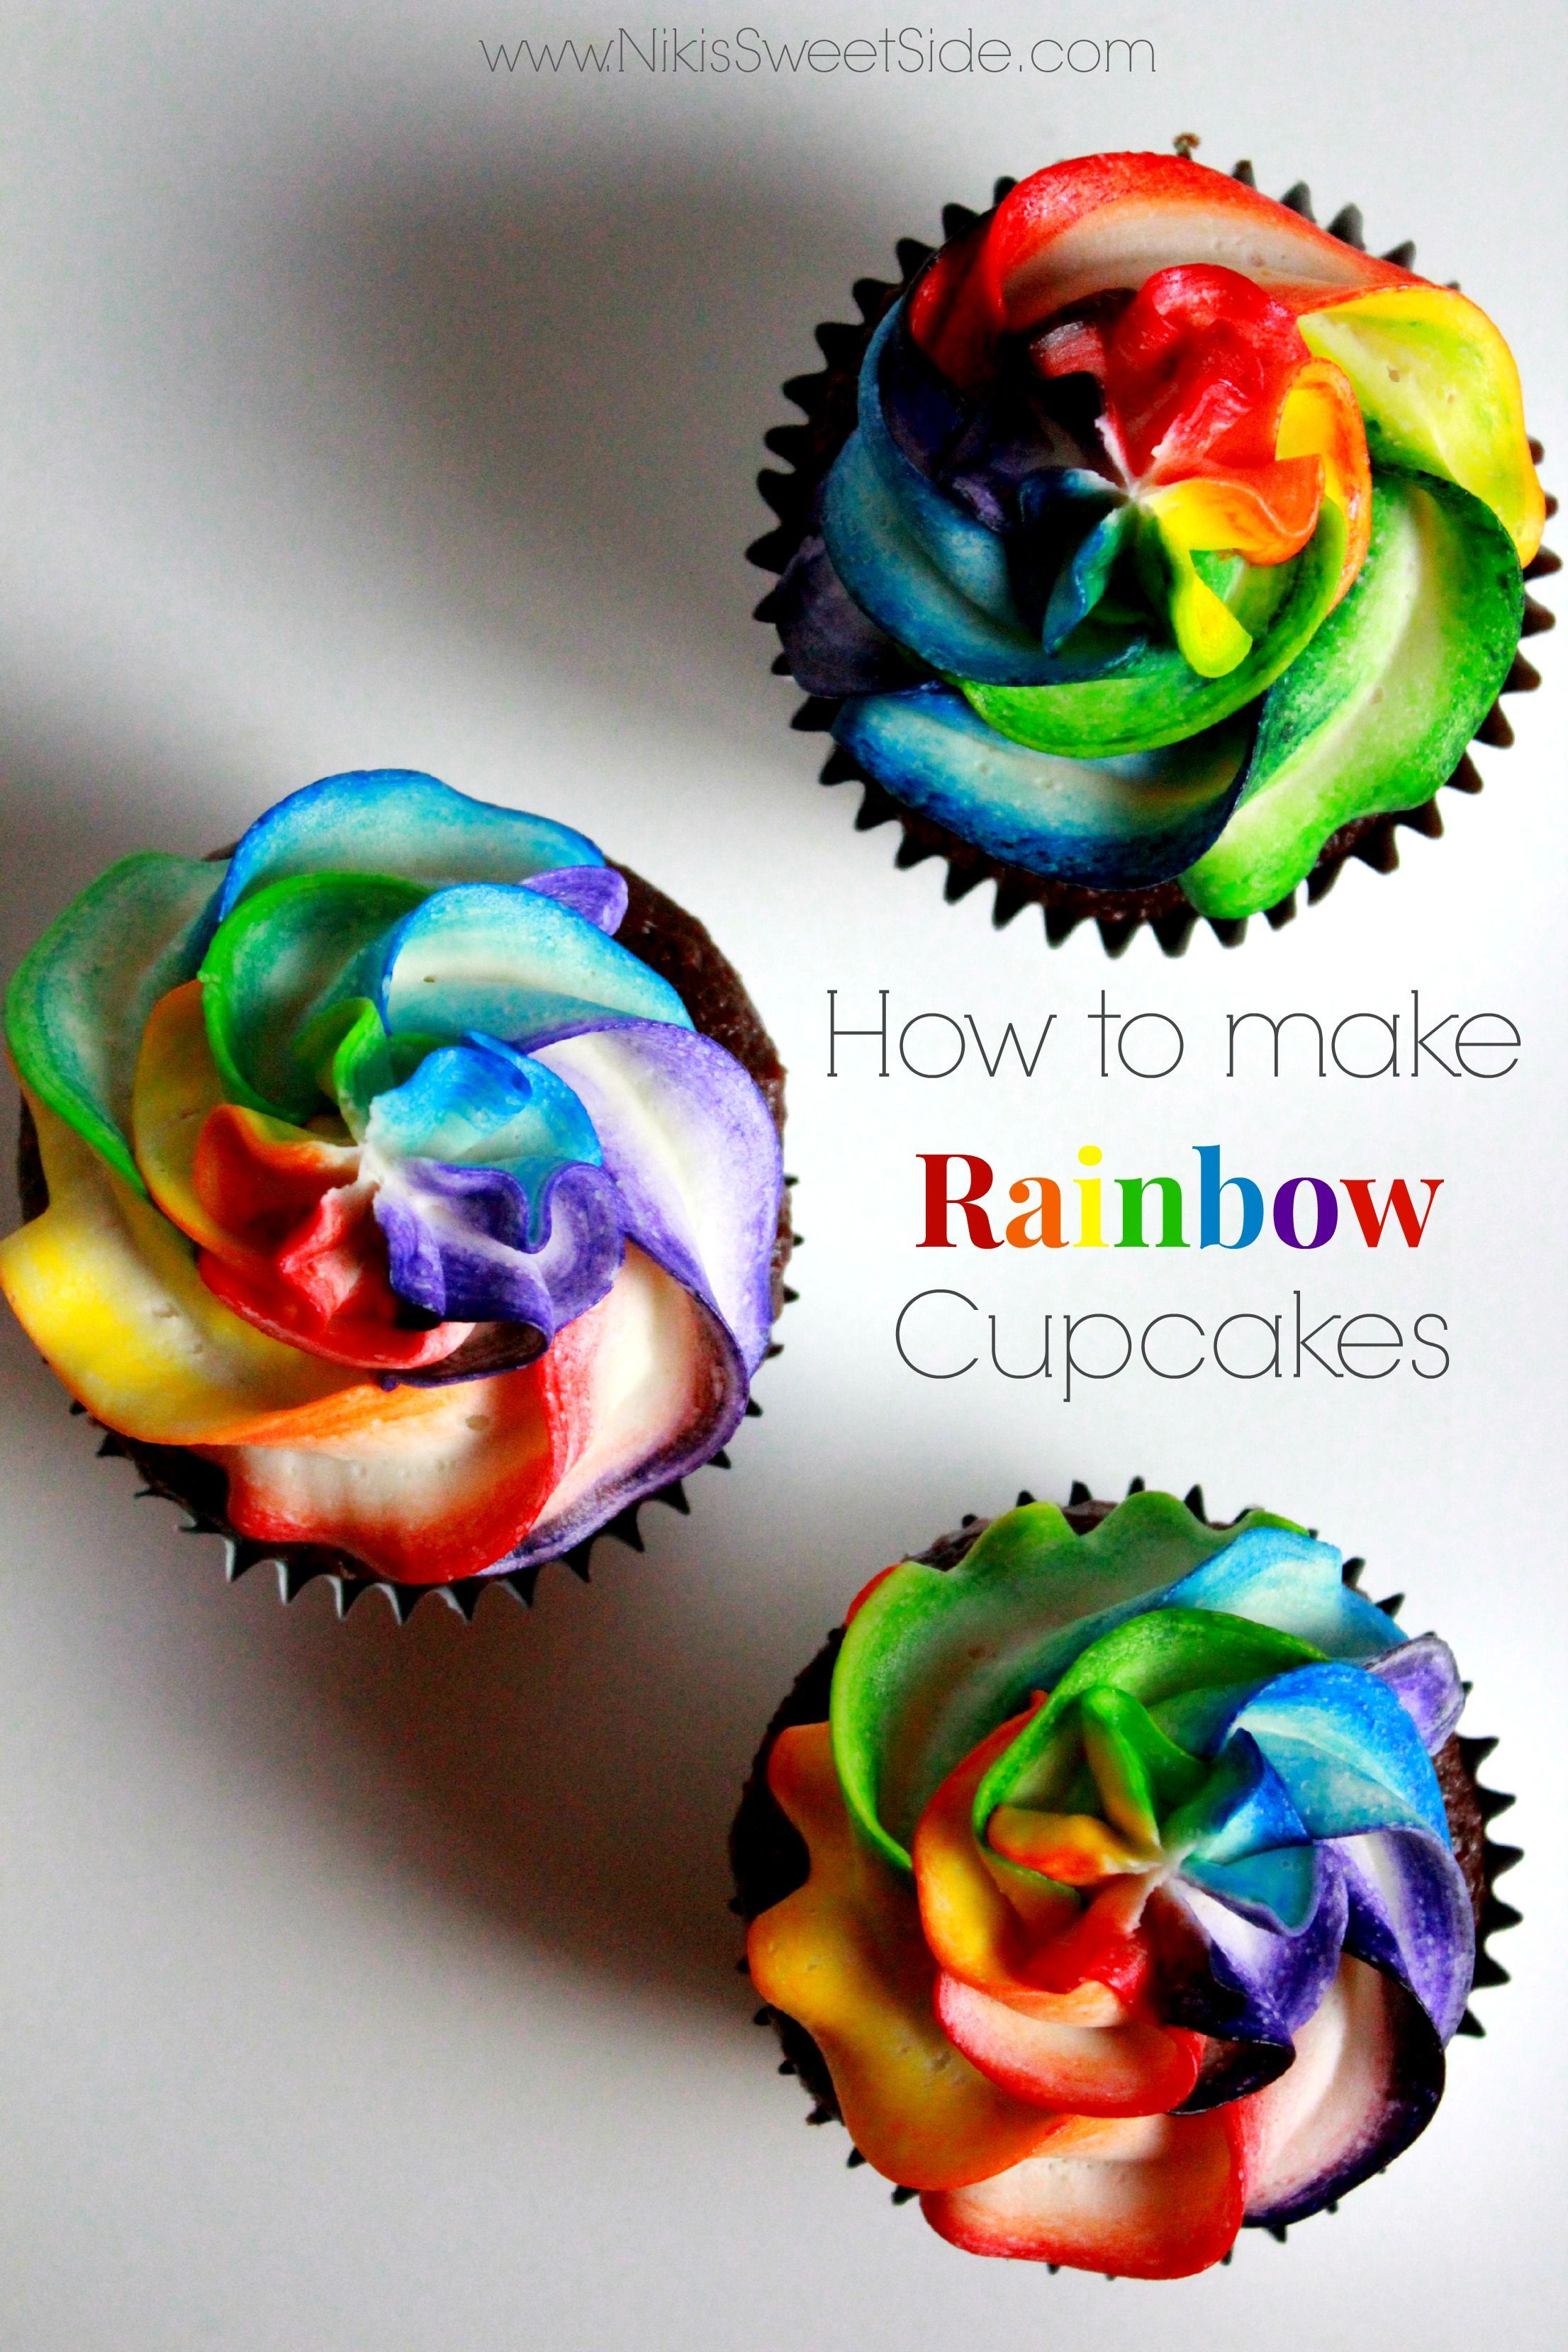 This is a short tutorial on how to make your own Rainbow Cupcakes! How cool are those? And pretty! Well, I’ve received a lot of